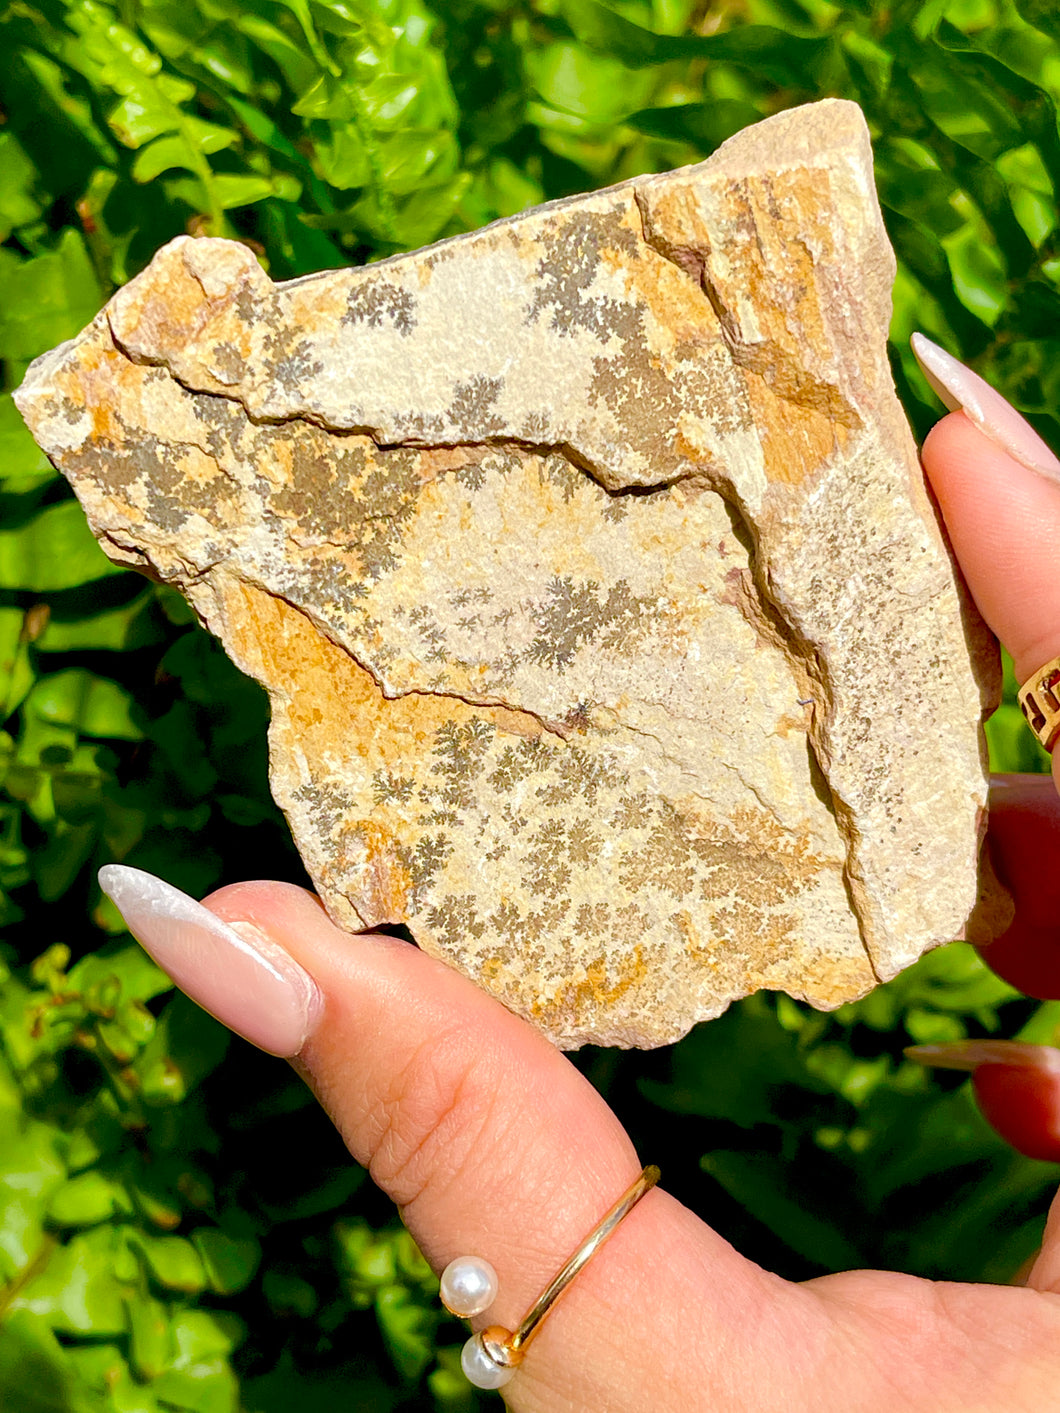 ⊹ Raw Dendritic Limestone ⊹ Found Personally by the Shop Owner ⊹